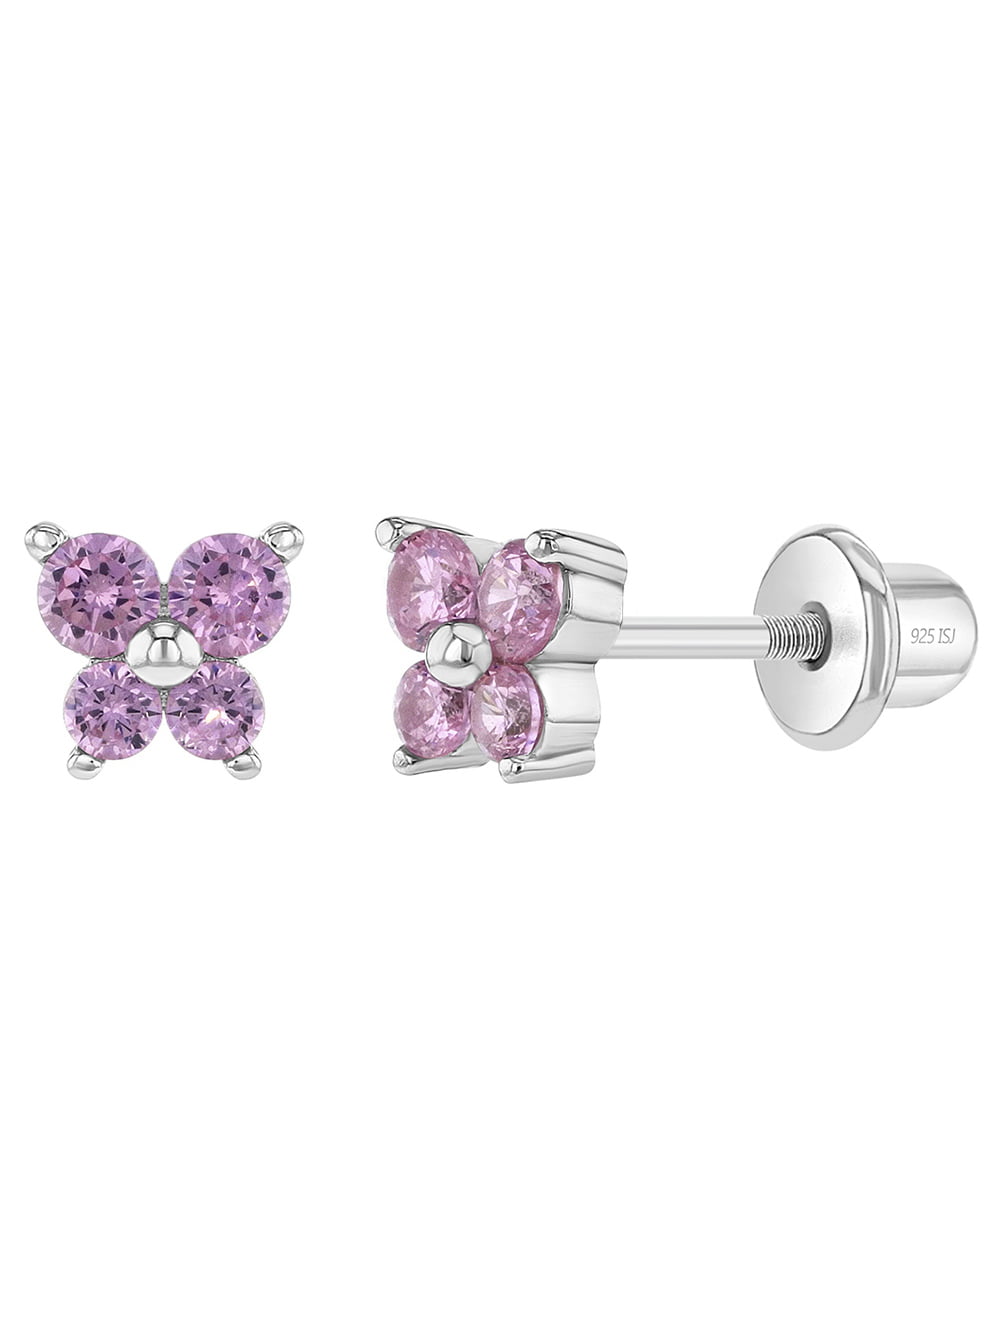 925 Sterling Silver Pink Oval Cubic Zirconia Screw Back Earrings for Young Girls 